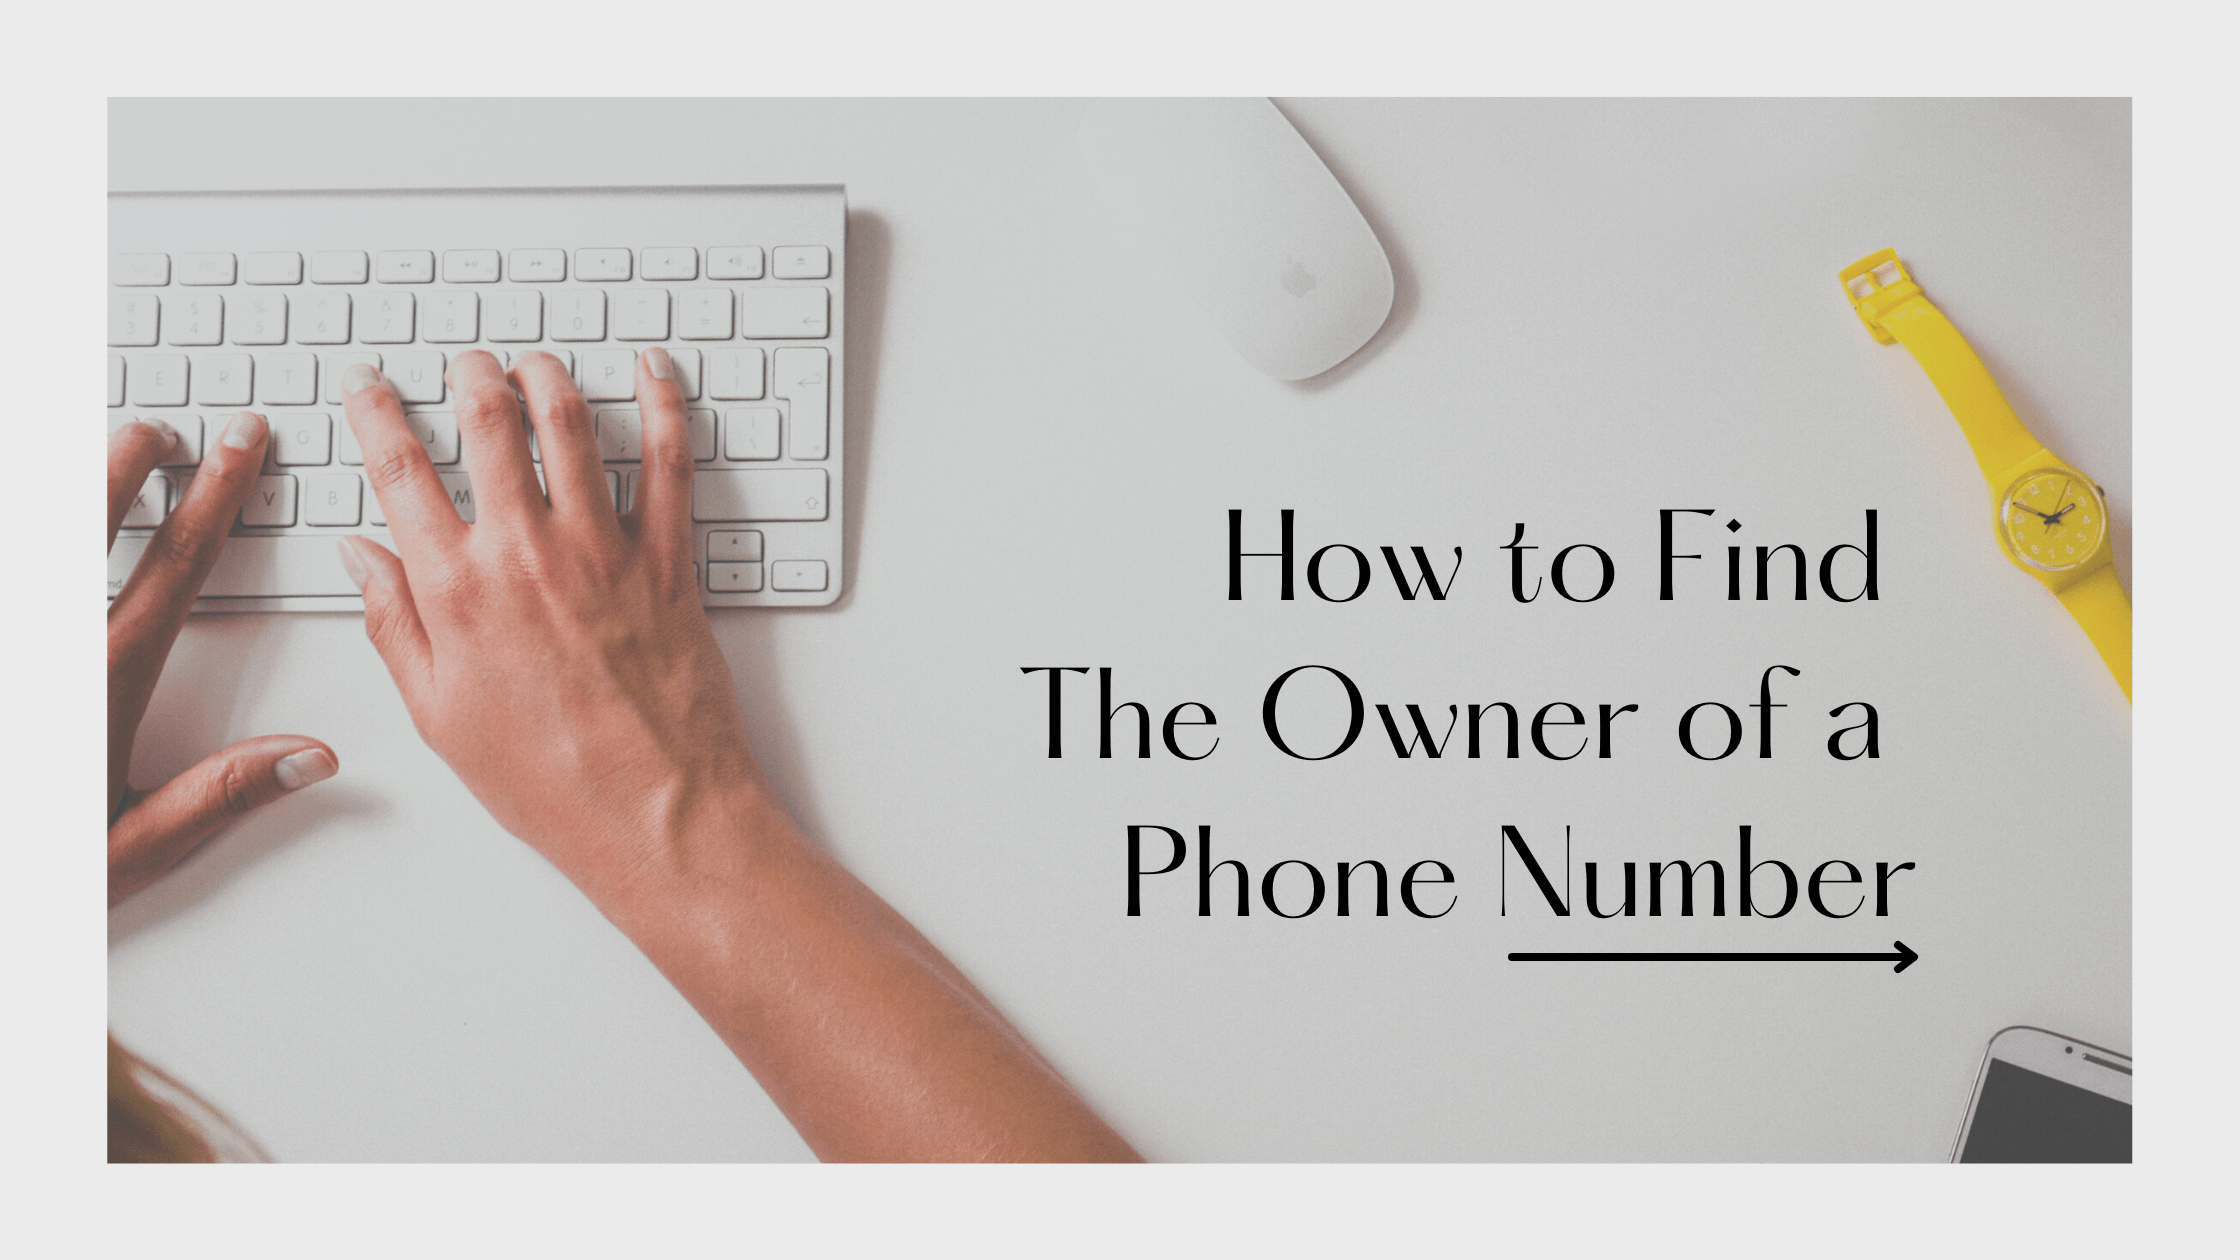 How to Find the Owner of a Phone Number